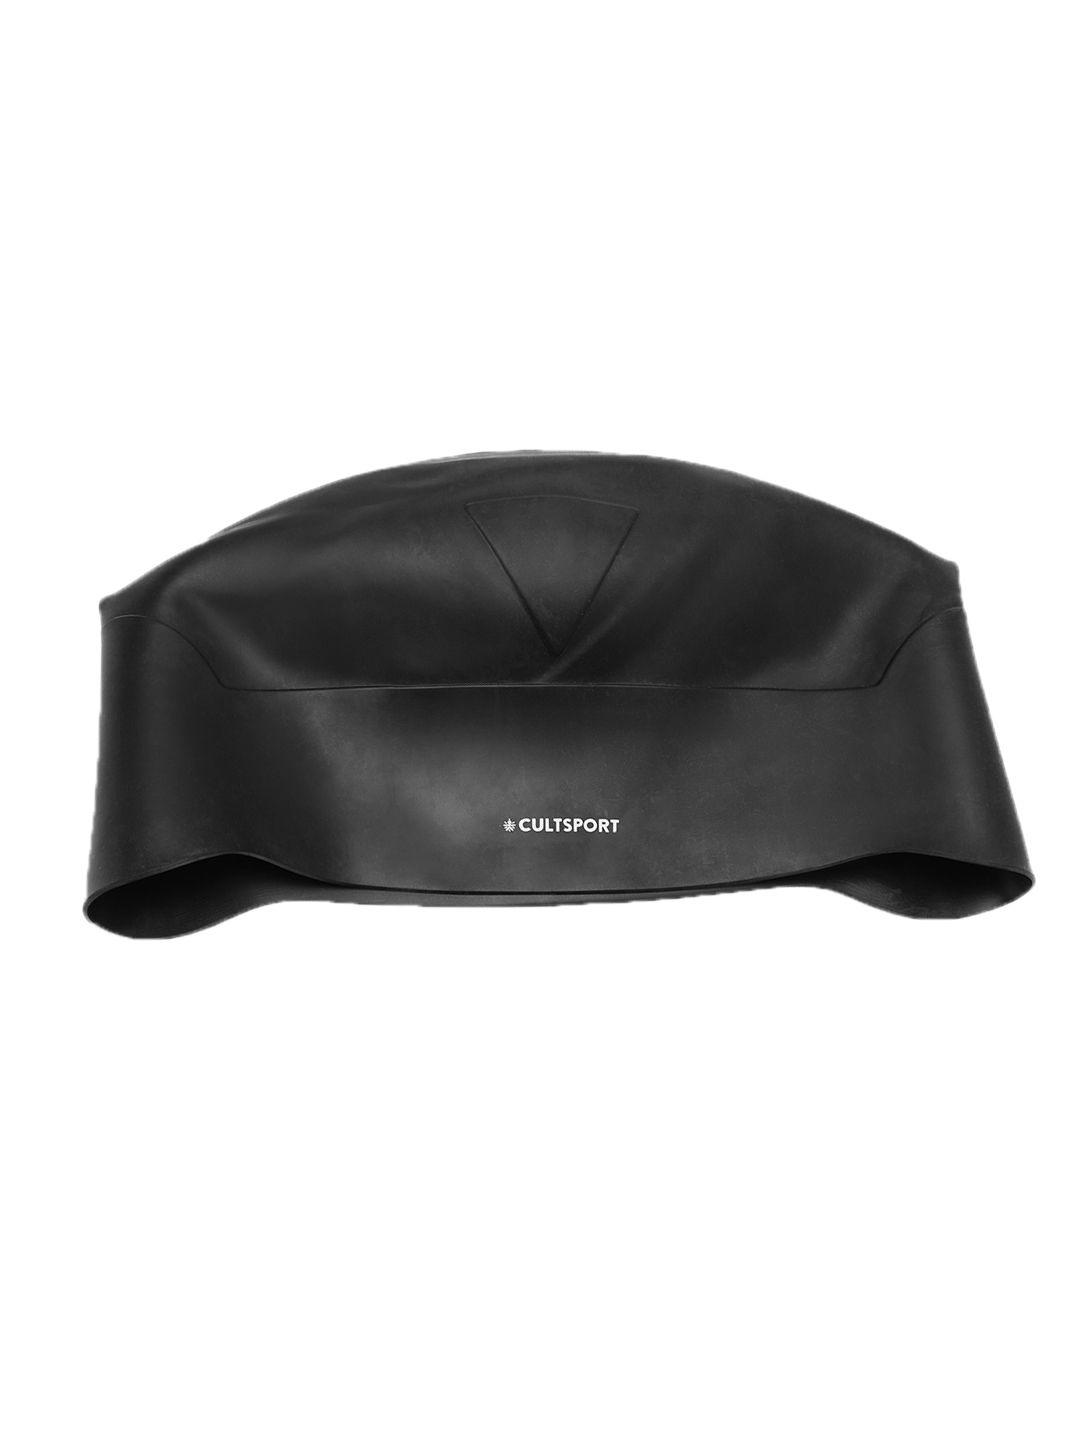 cultsport lightweight quick dry silicon swimming cap